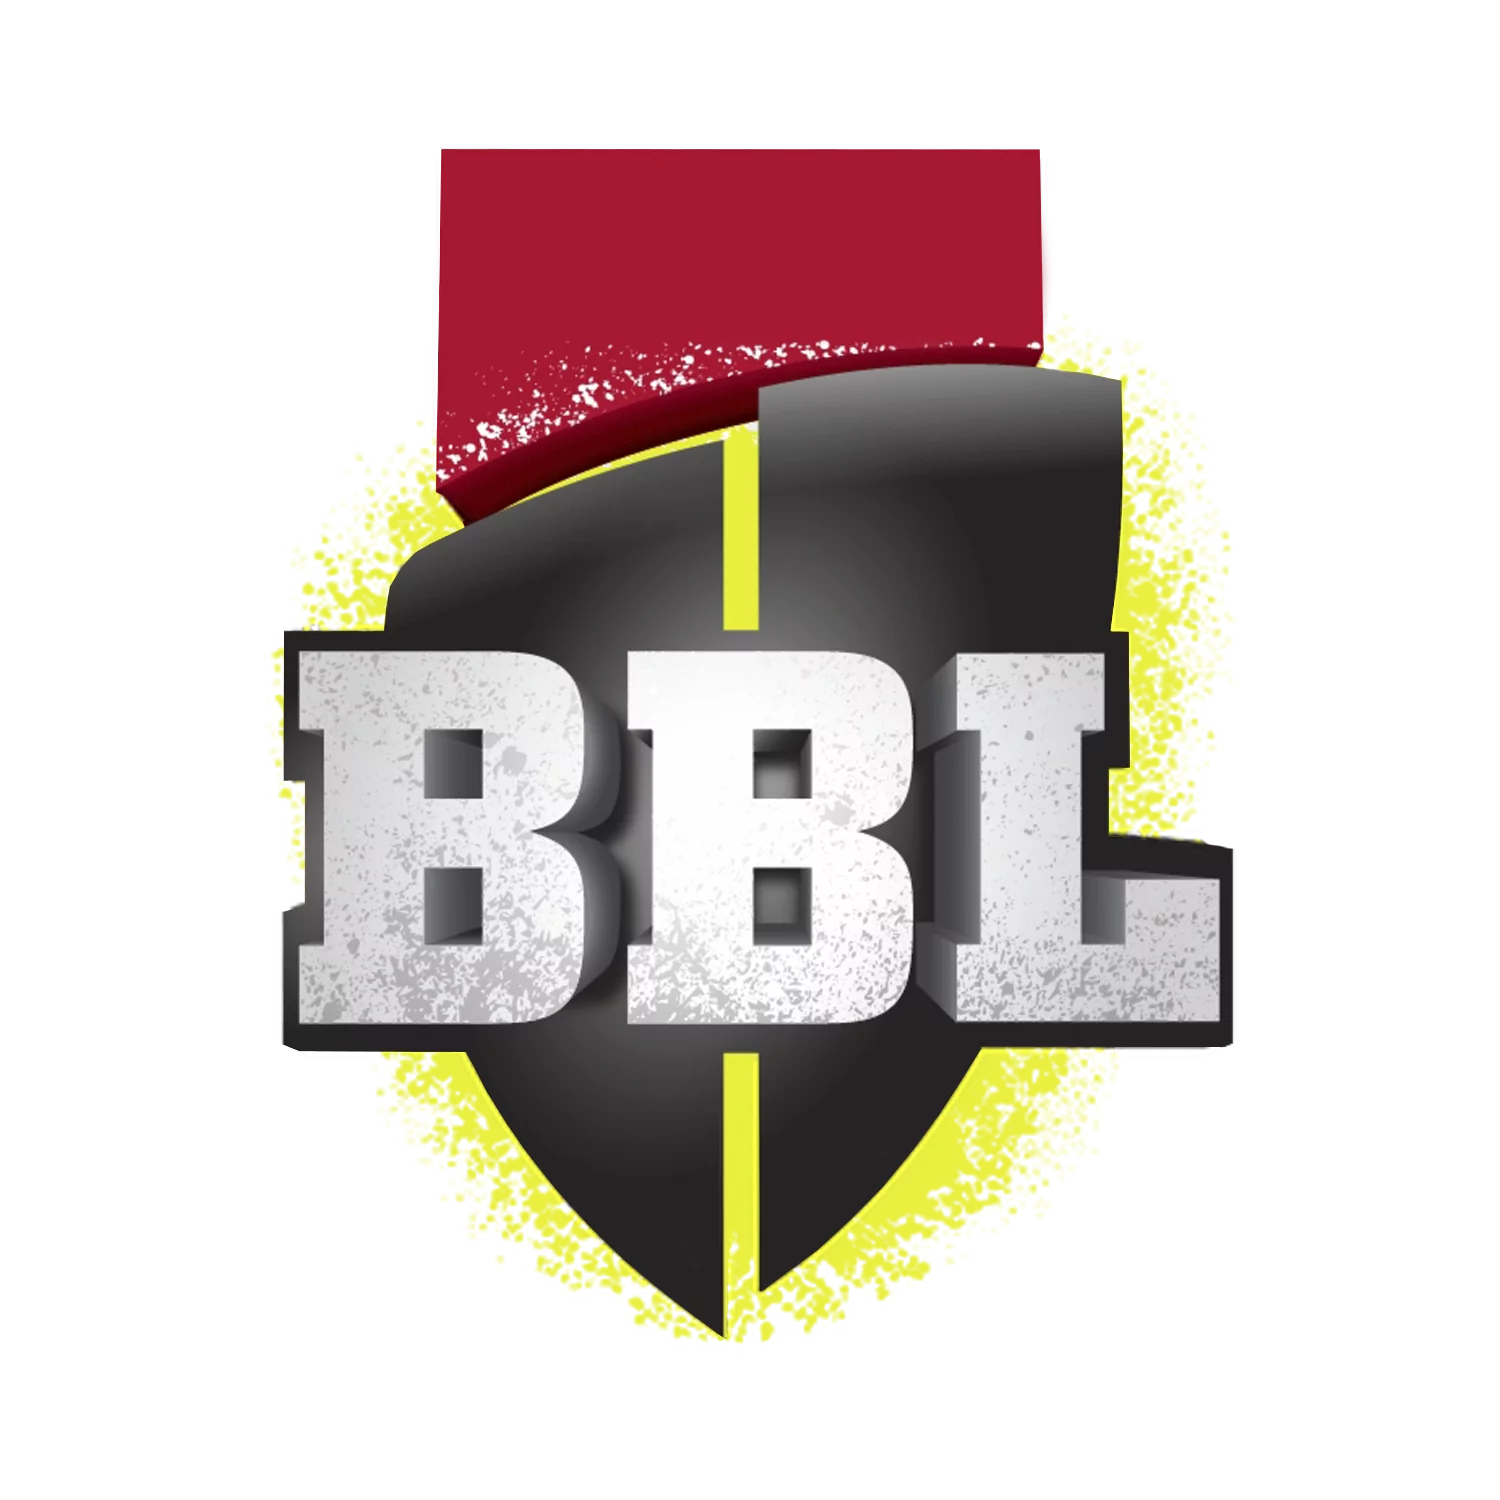 Learn about the structure, rules, and teams that participate in the Big Bash League.